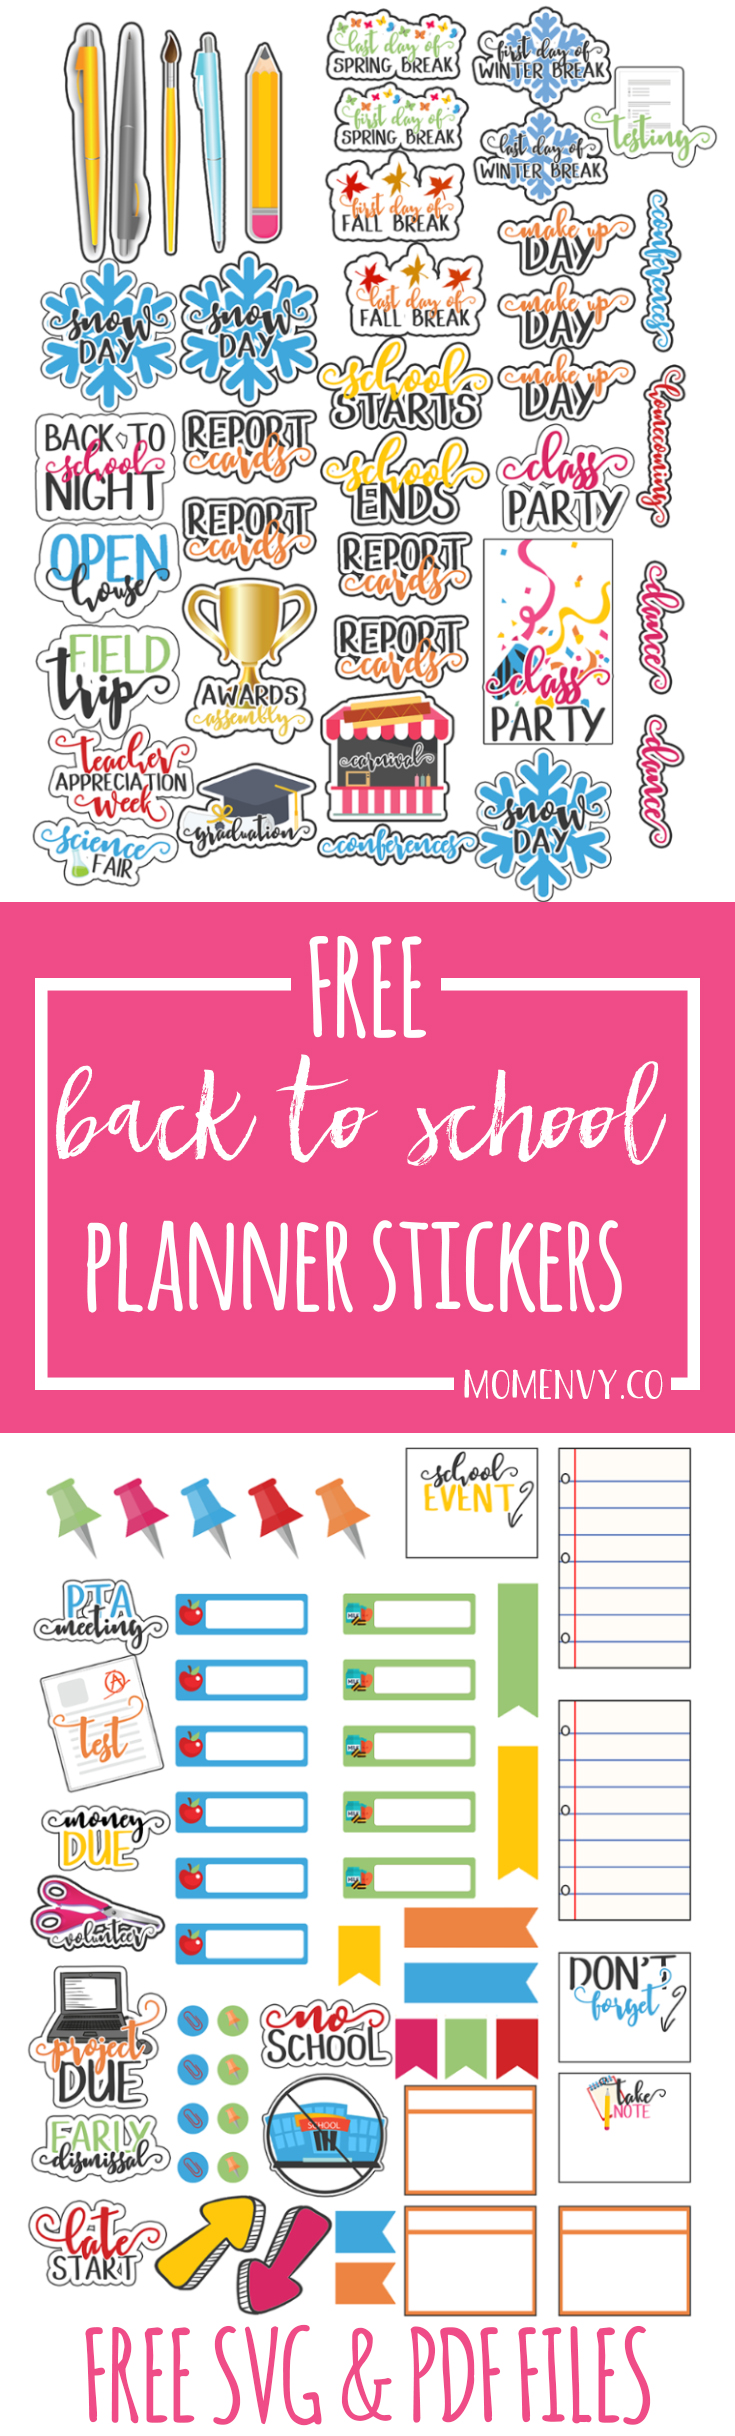 Back to School Planner Stickers - Perfect for Calendars, too! They can be used with any size planner. Free planner stickers for teachers, free planner stickers for parents, and planner free stickers for students. Free Happy Planner stickers. Free Erin Condren stickers. 